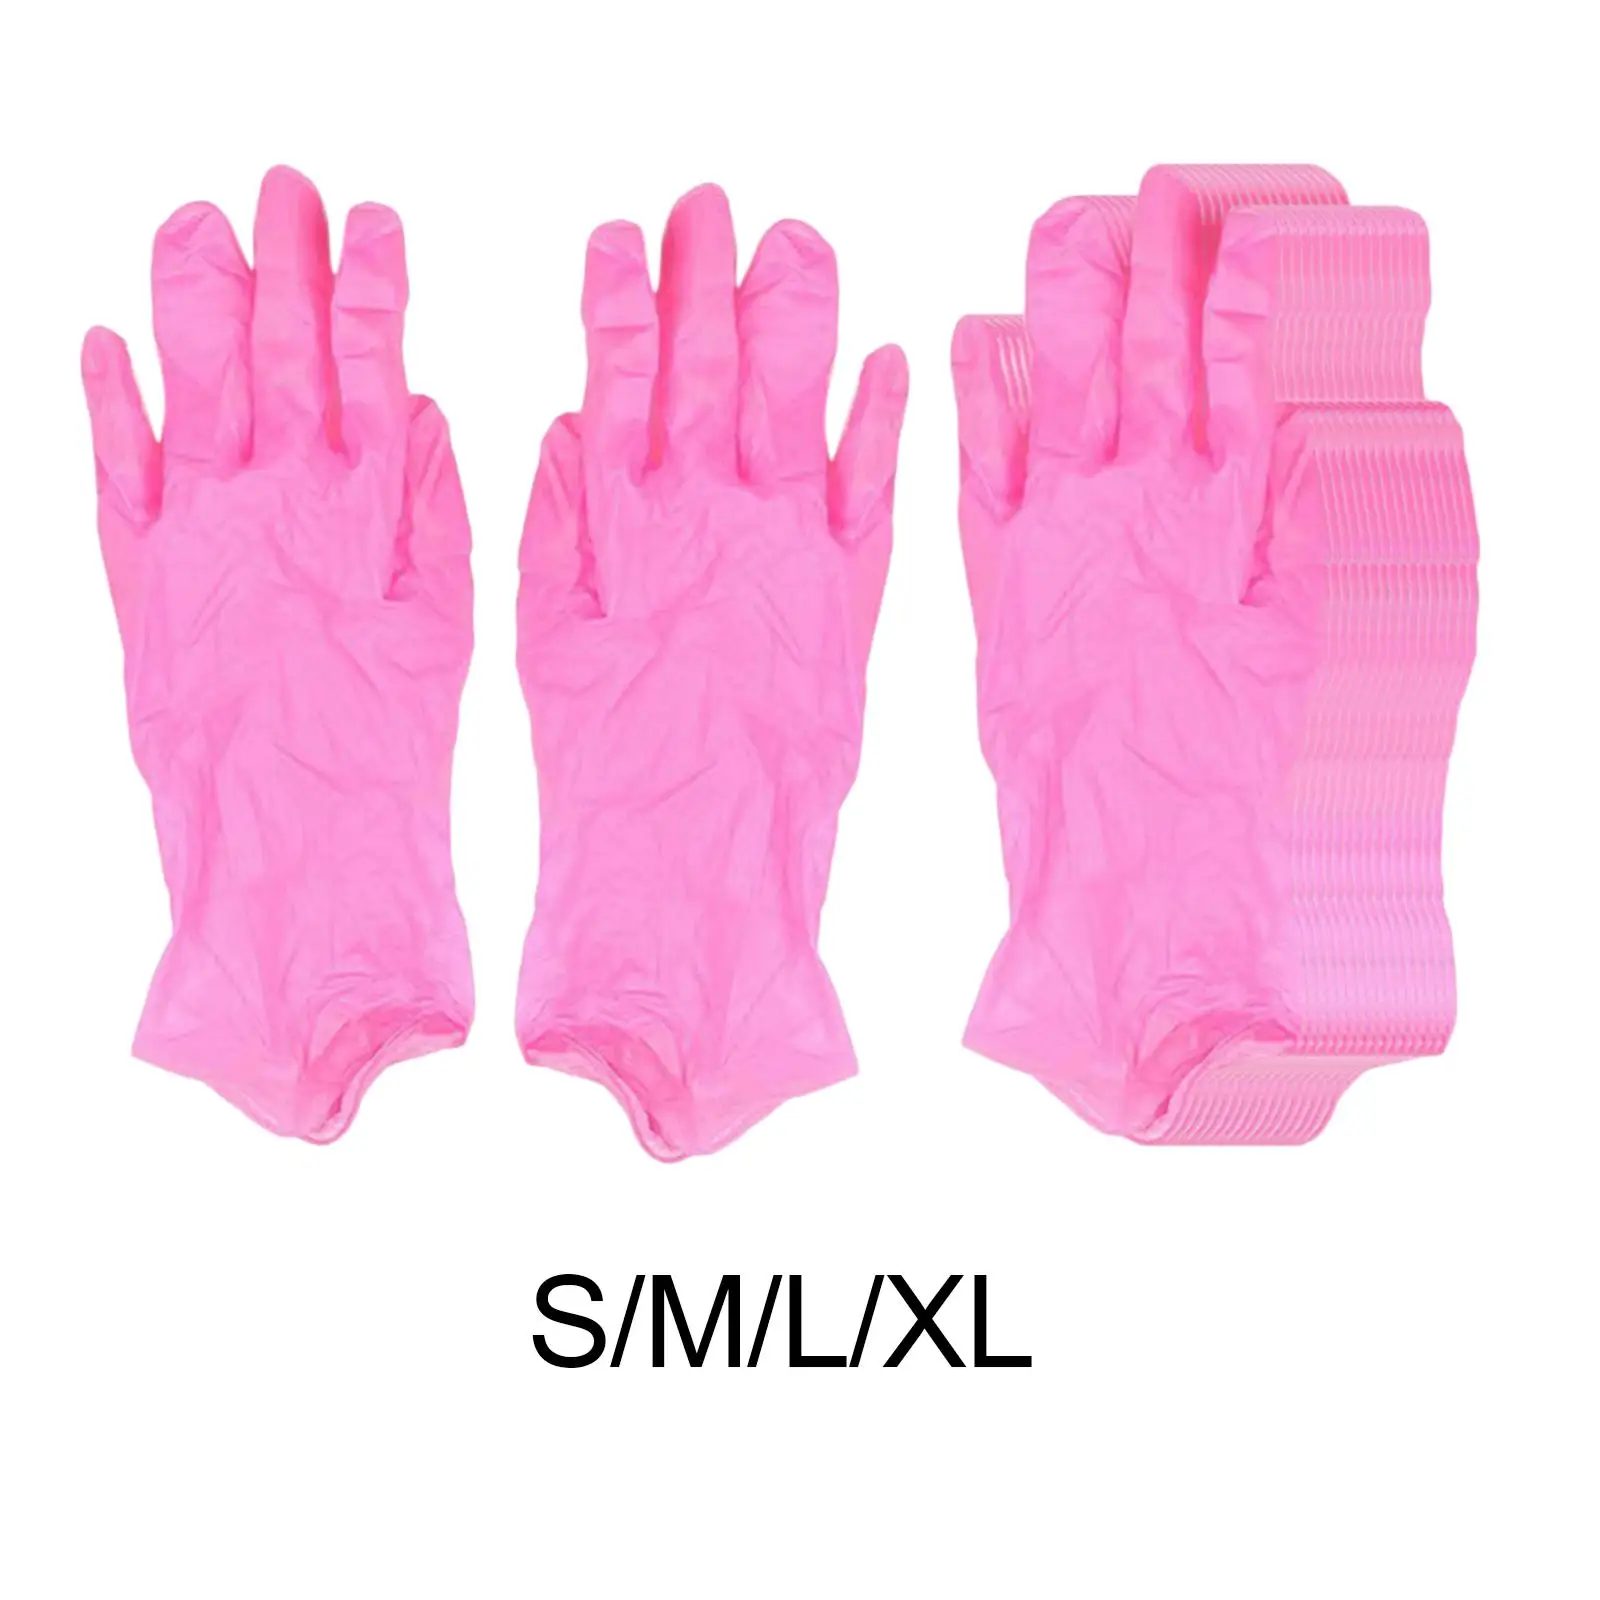 100x Nitrile Disposable Gloves Latex Free Powder Free Disposable Gloves for Office Caterers Cooking Cleaners Gardeners